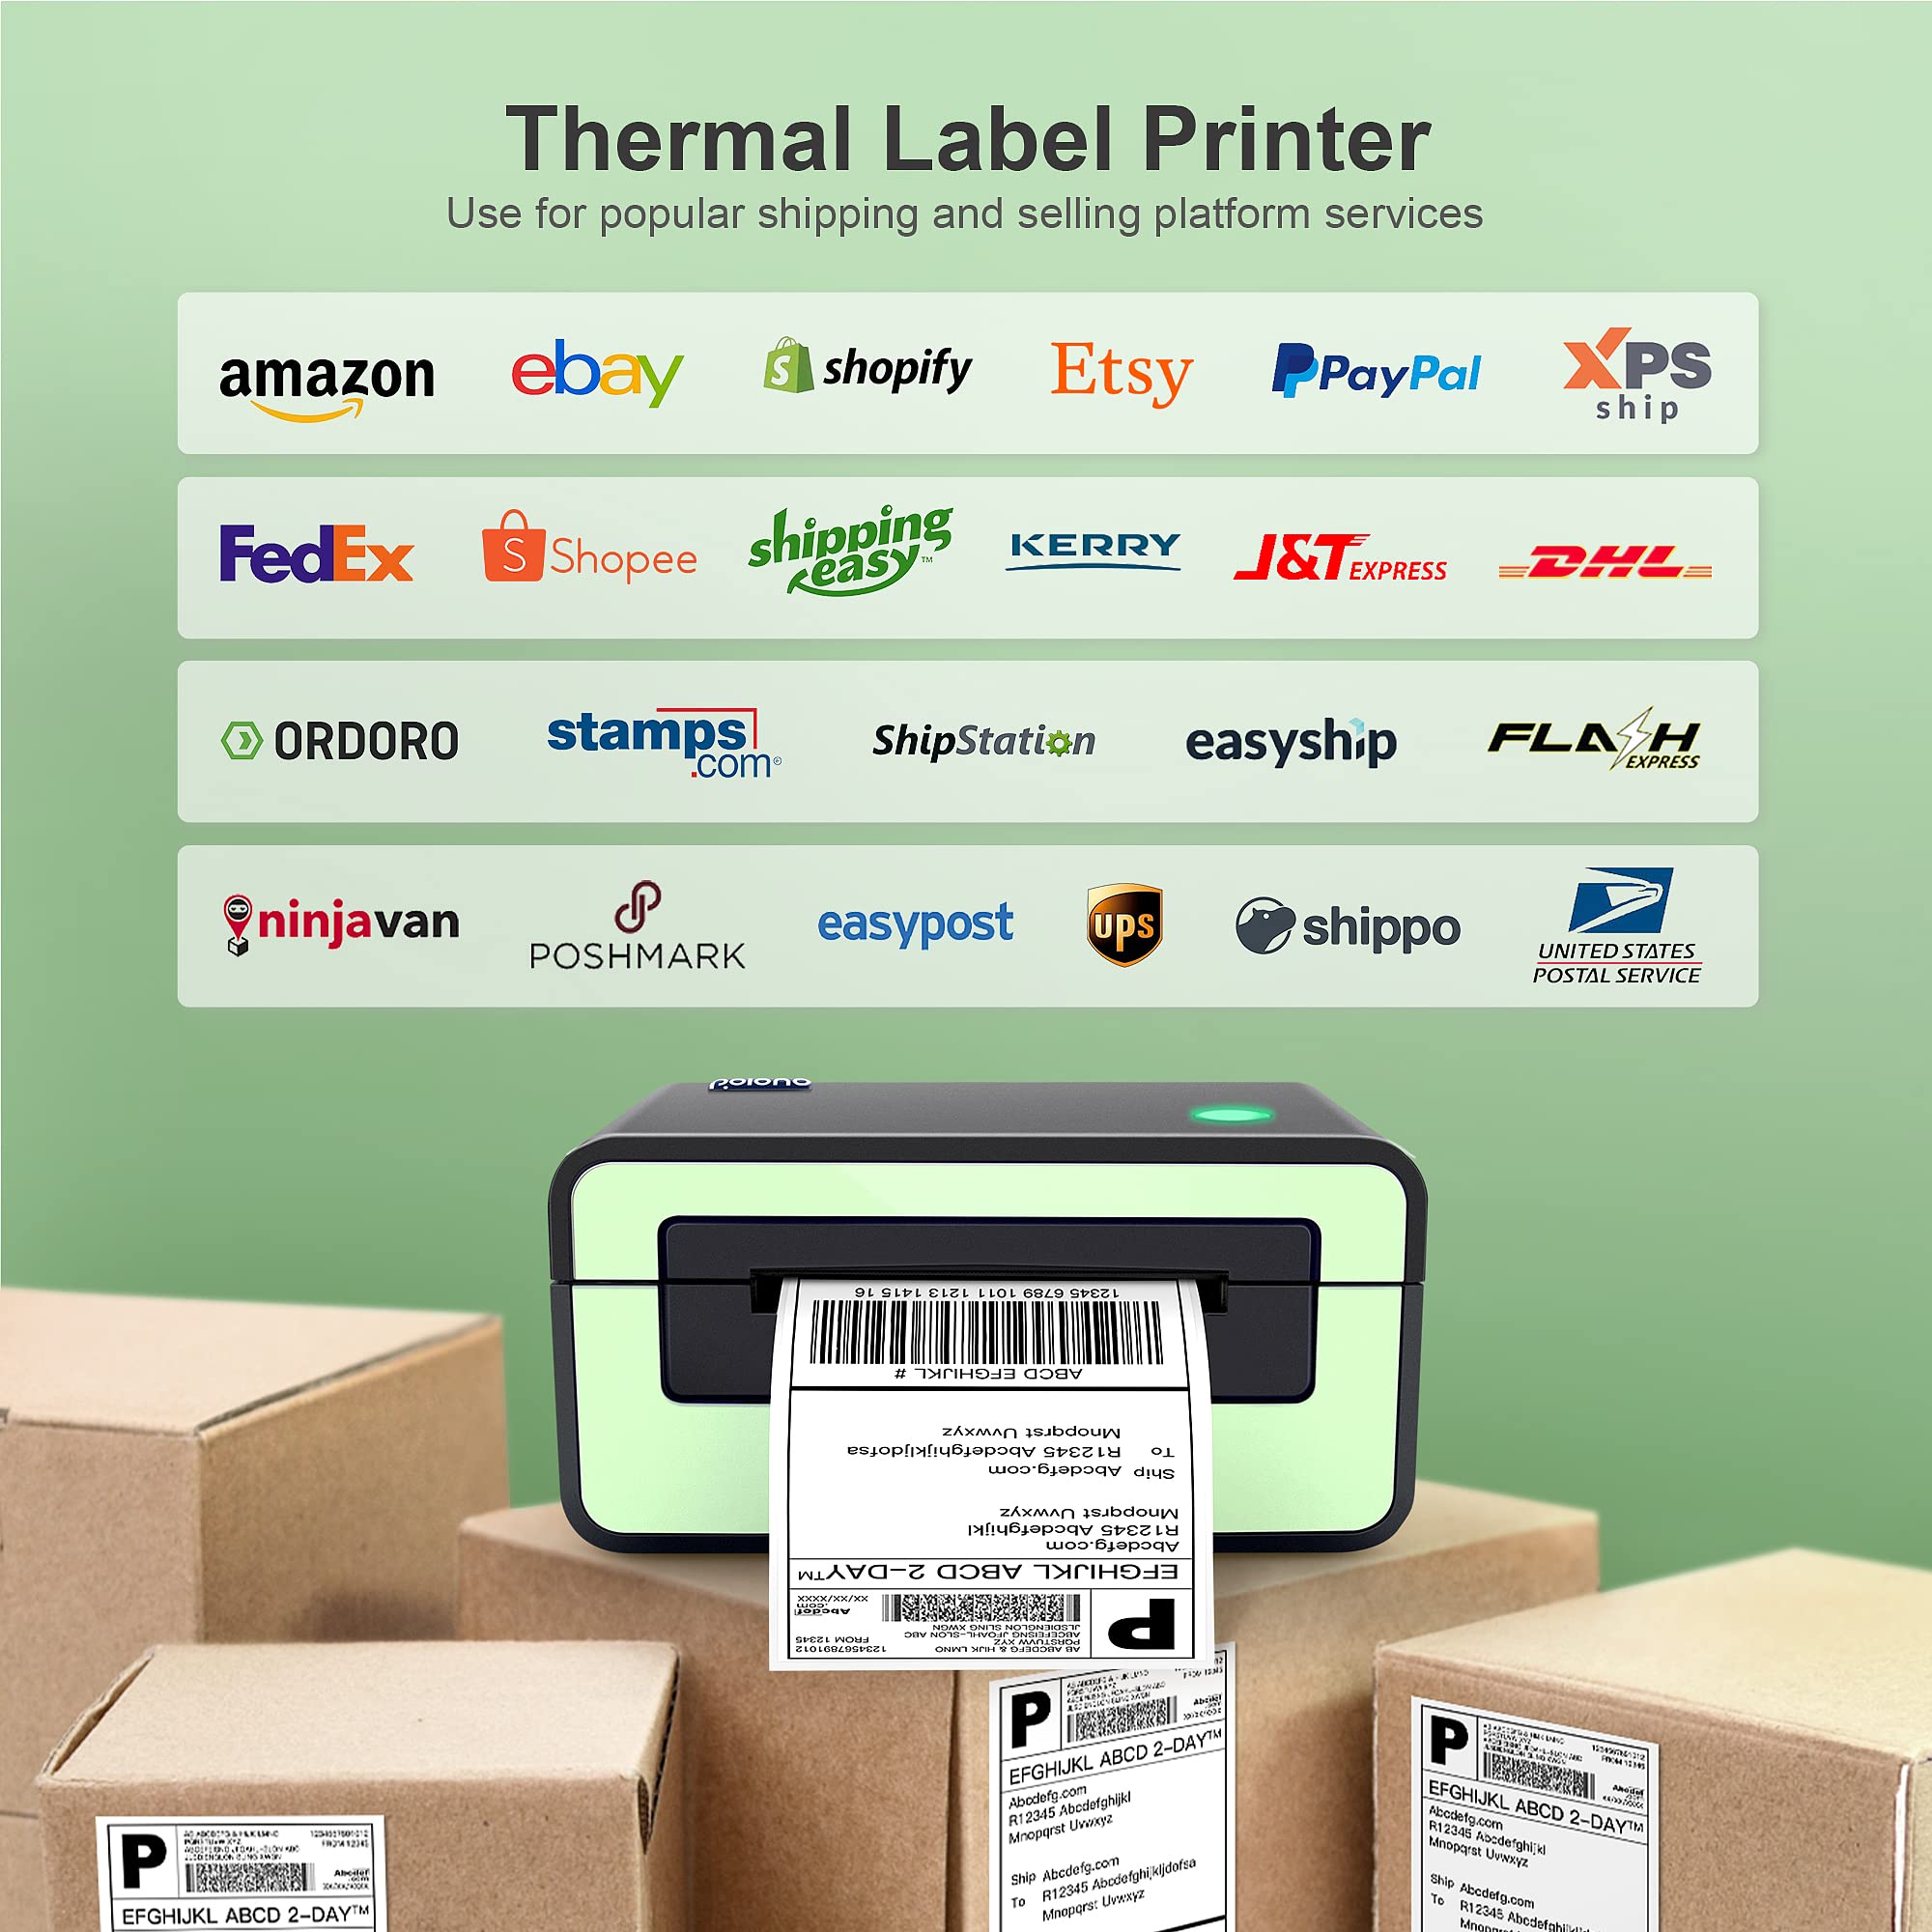 POLONO Shipping Label Printer, PL60 4x6 Thermal Printer, Shipping Label Printer for Small Business, Sticker Printer Compatible with Shopify, Ebay, UPS, Amazon, Etsy, Support Windows, Mac (Green)